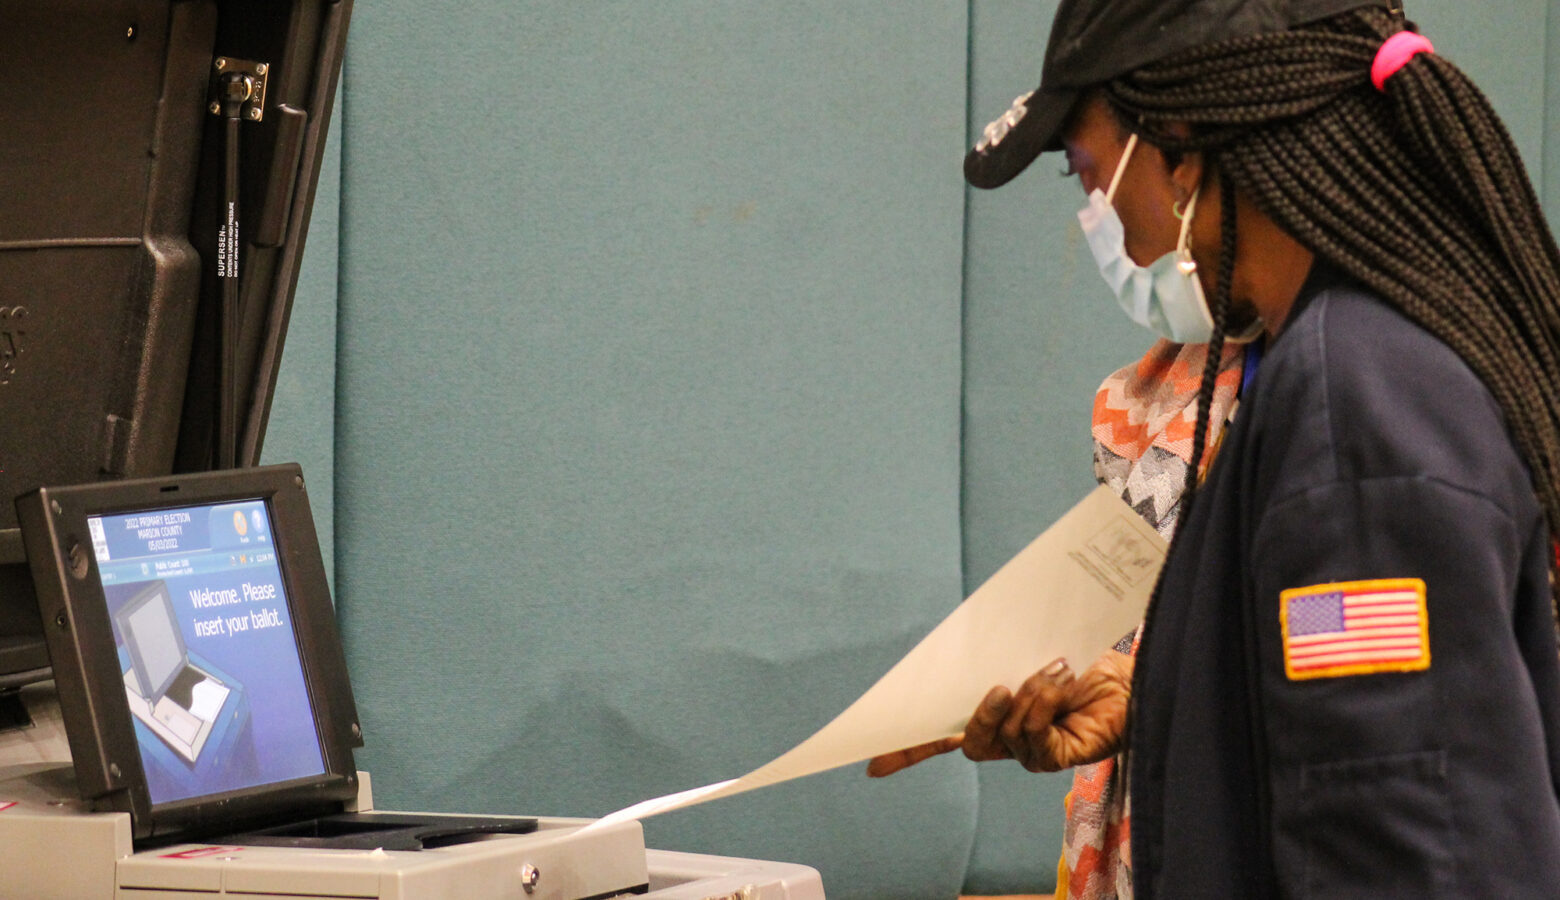 A person wearing a mask feeds their ballot into a return box.